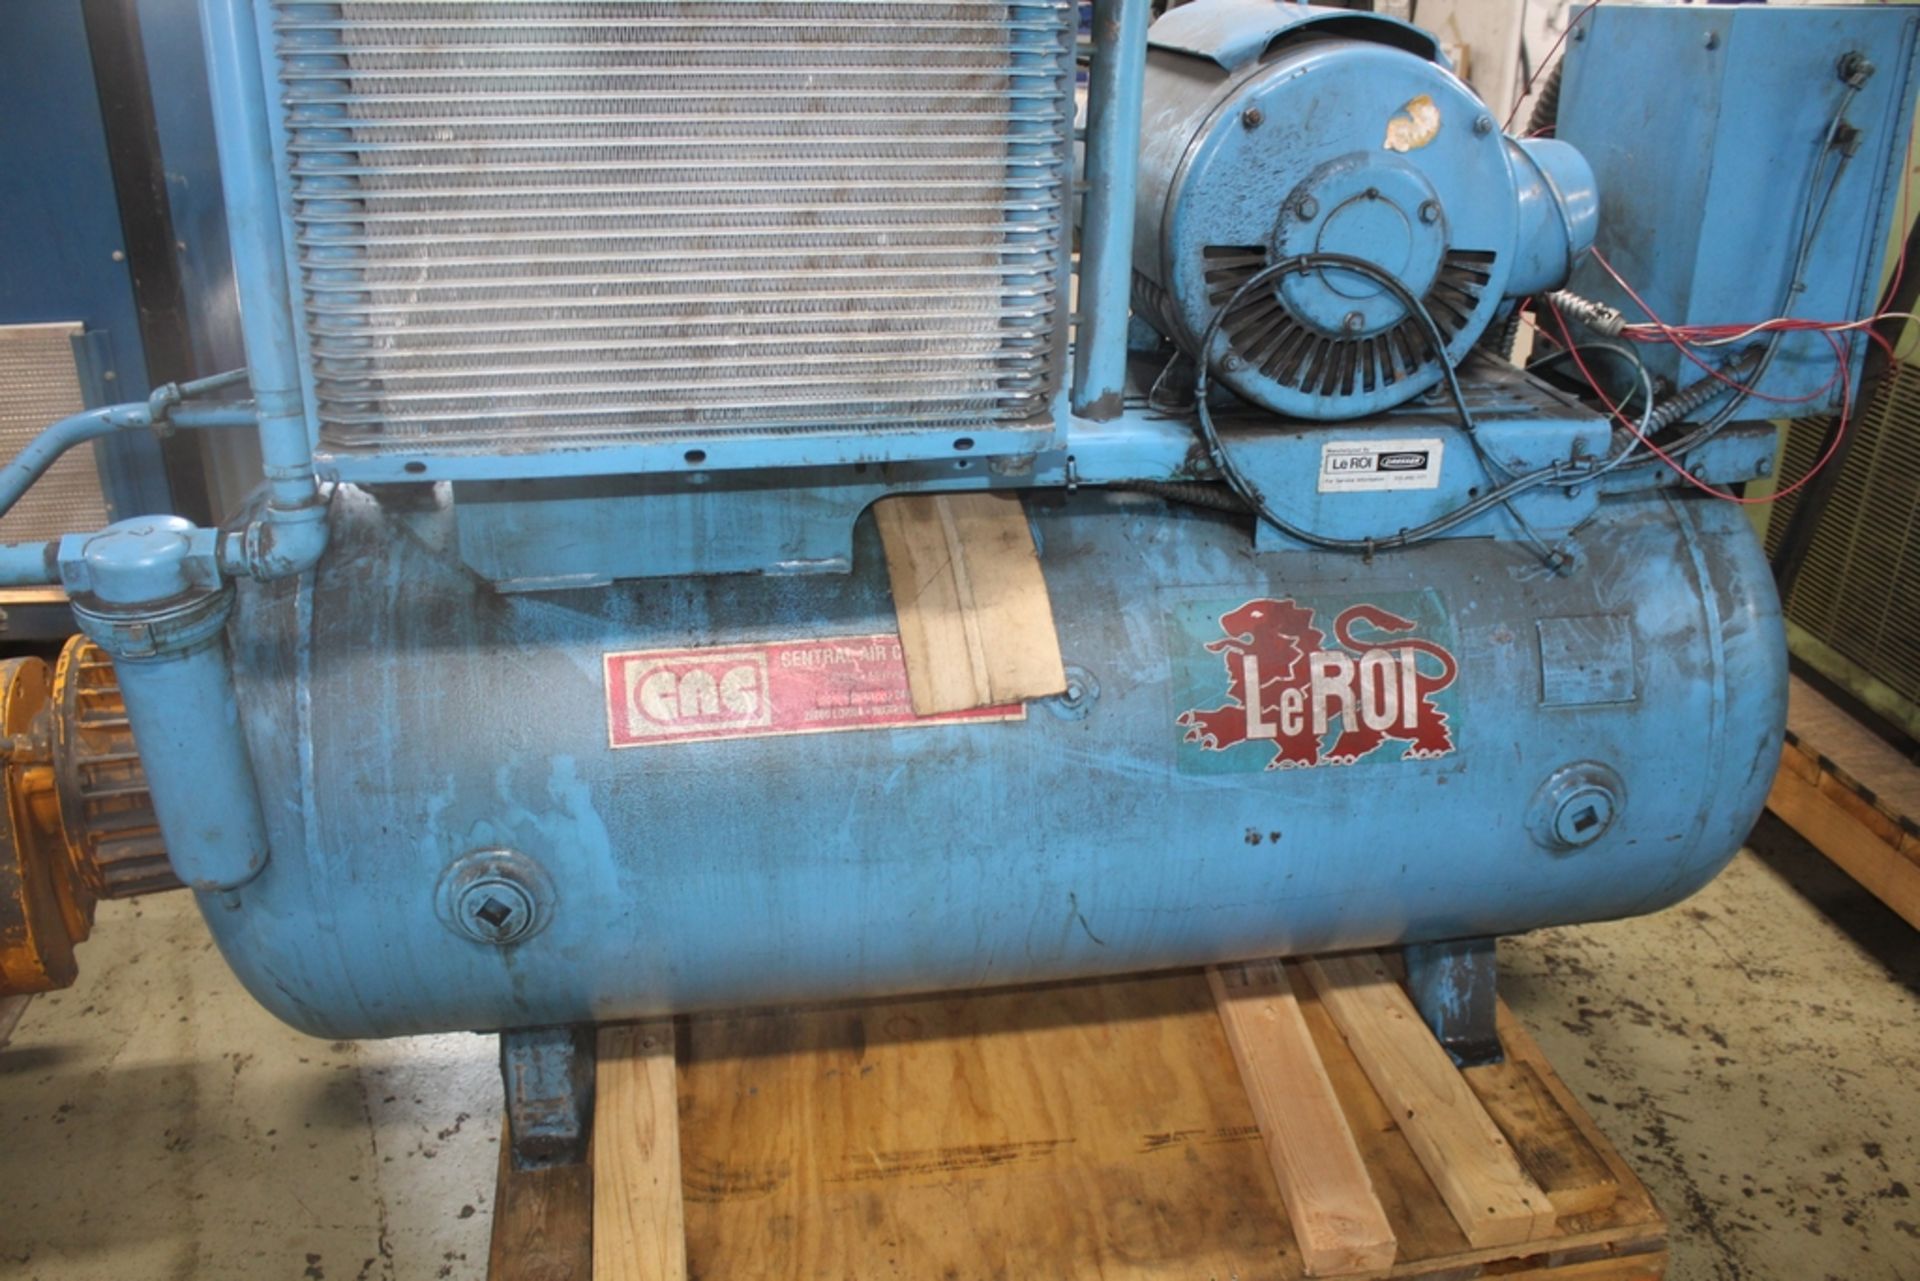 LEROI 25 HP MODEL A21E-107 TANK MOUNTED AIR COMPRESSOR, S/N 4141X108 - Image 2 of 5